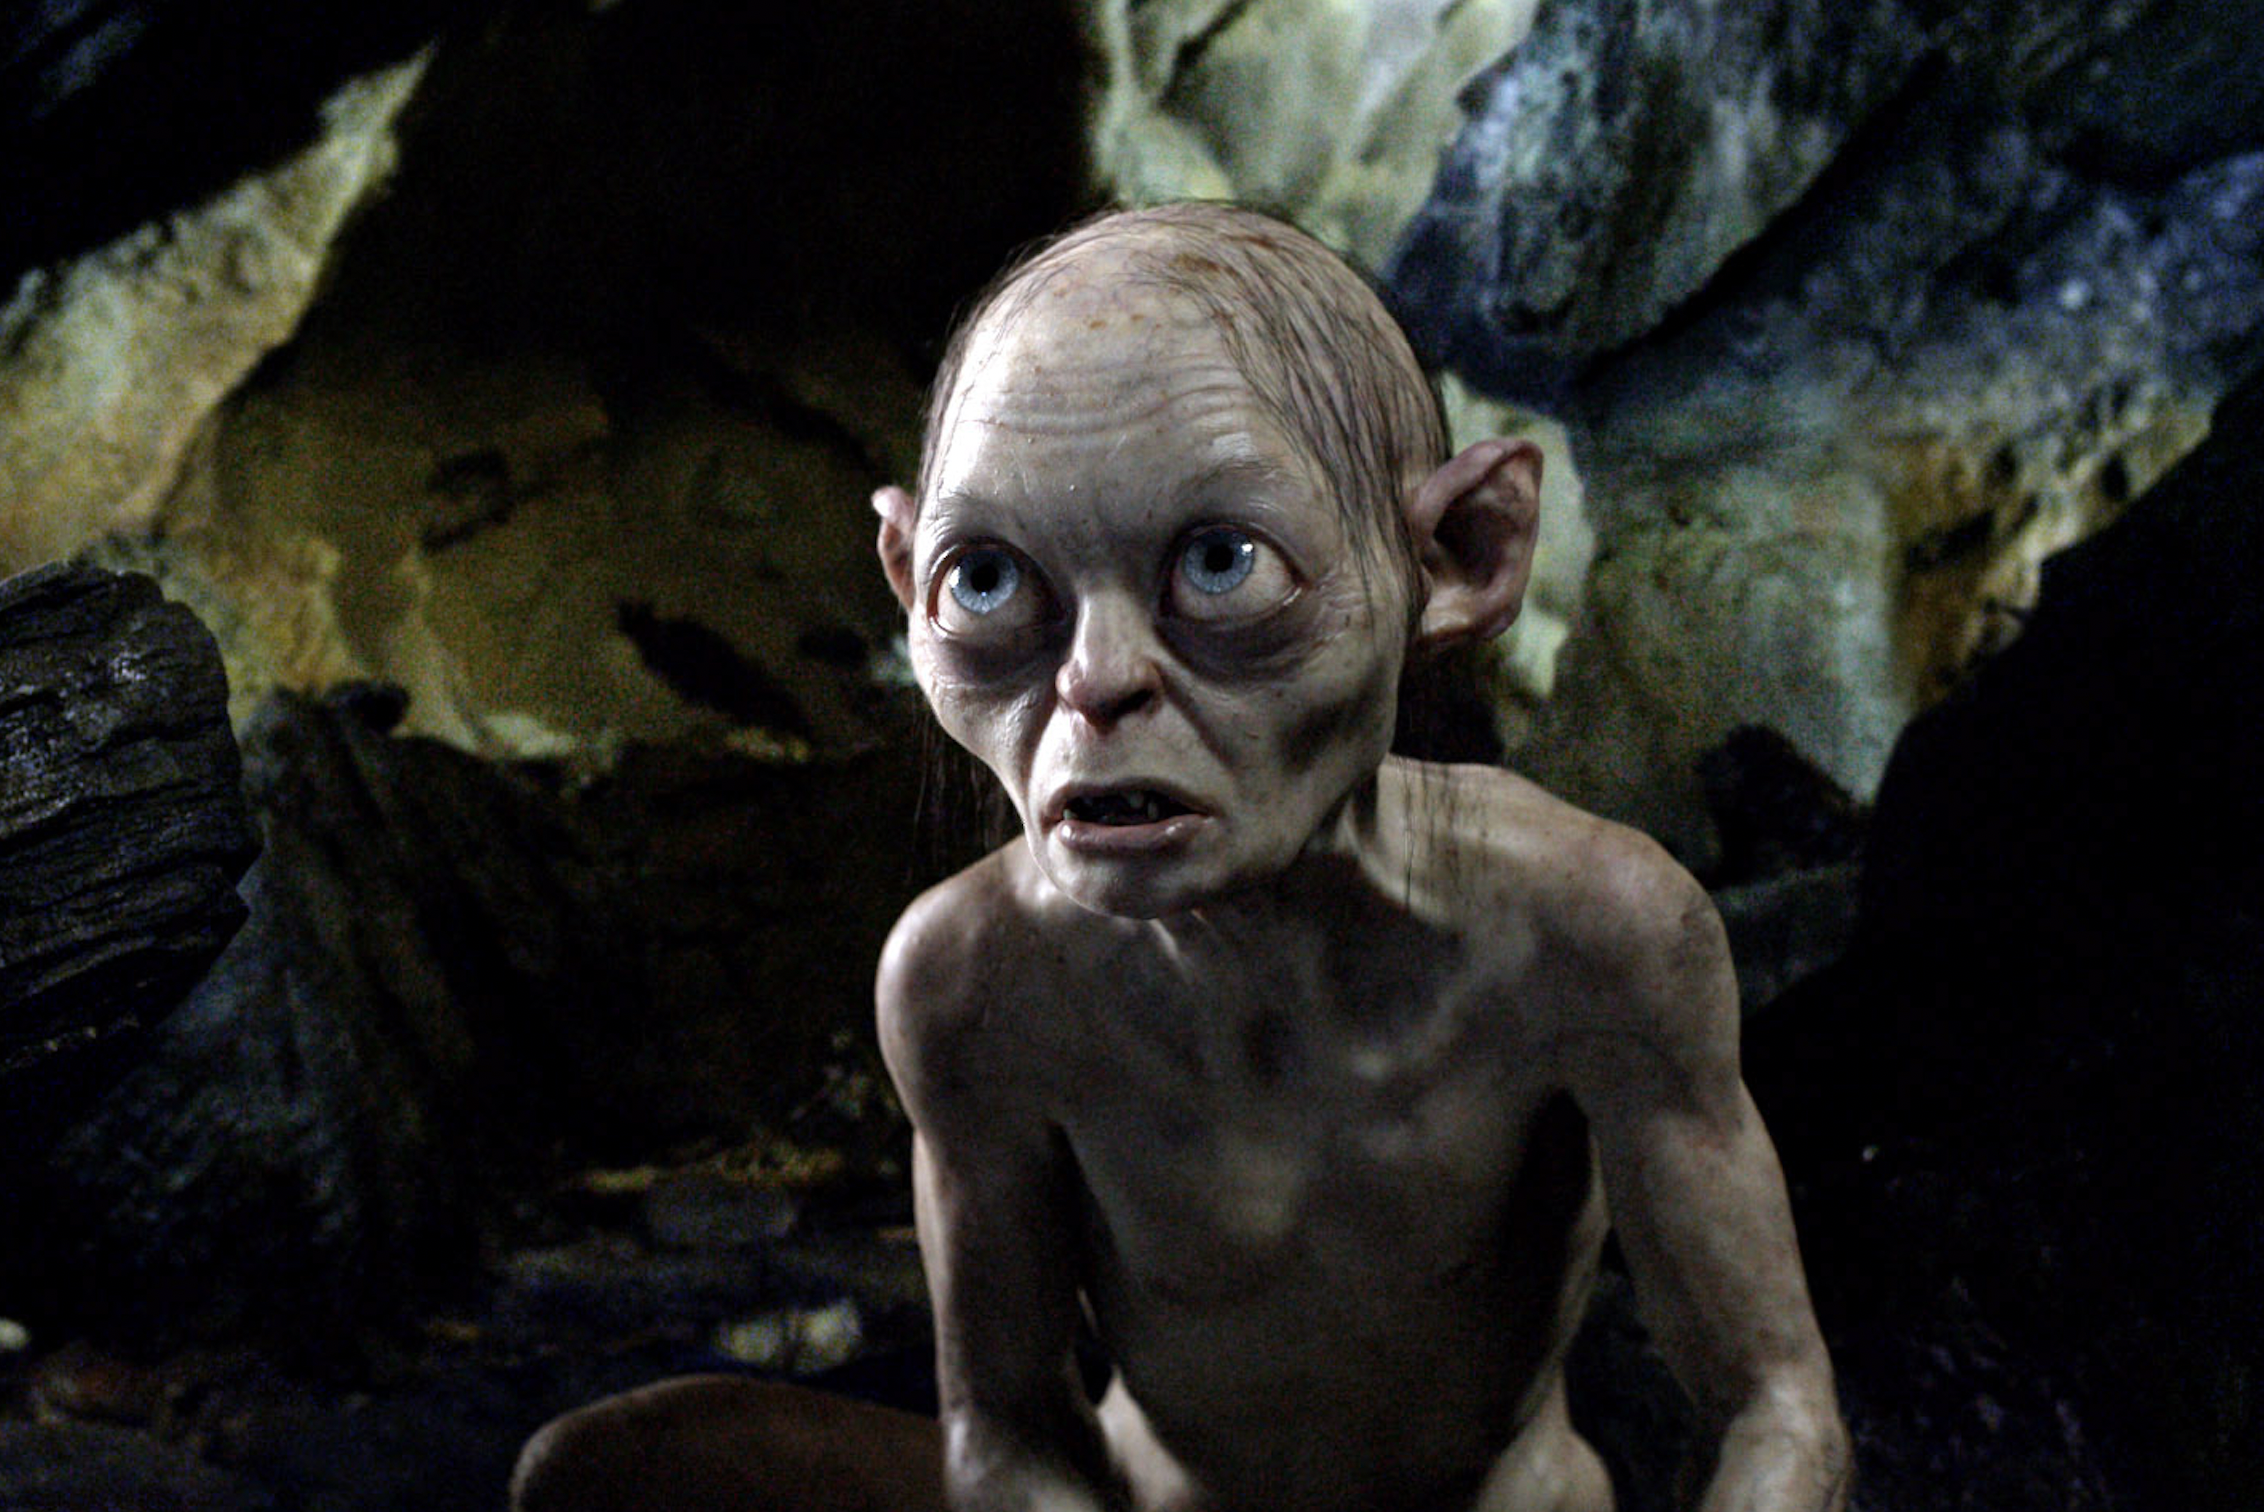 ...Gollum’ Fan Film Restored Online After It Got Blocked Following....’ New ‘Lord of the Rings’ Movie Announcement